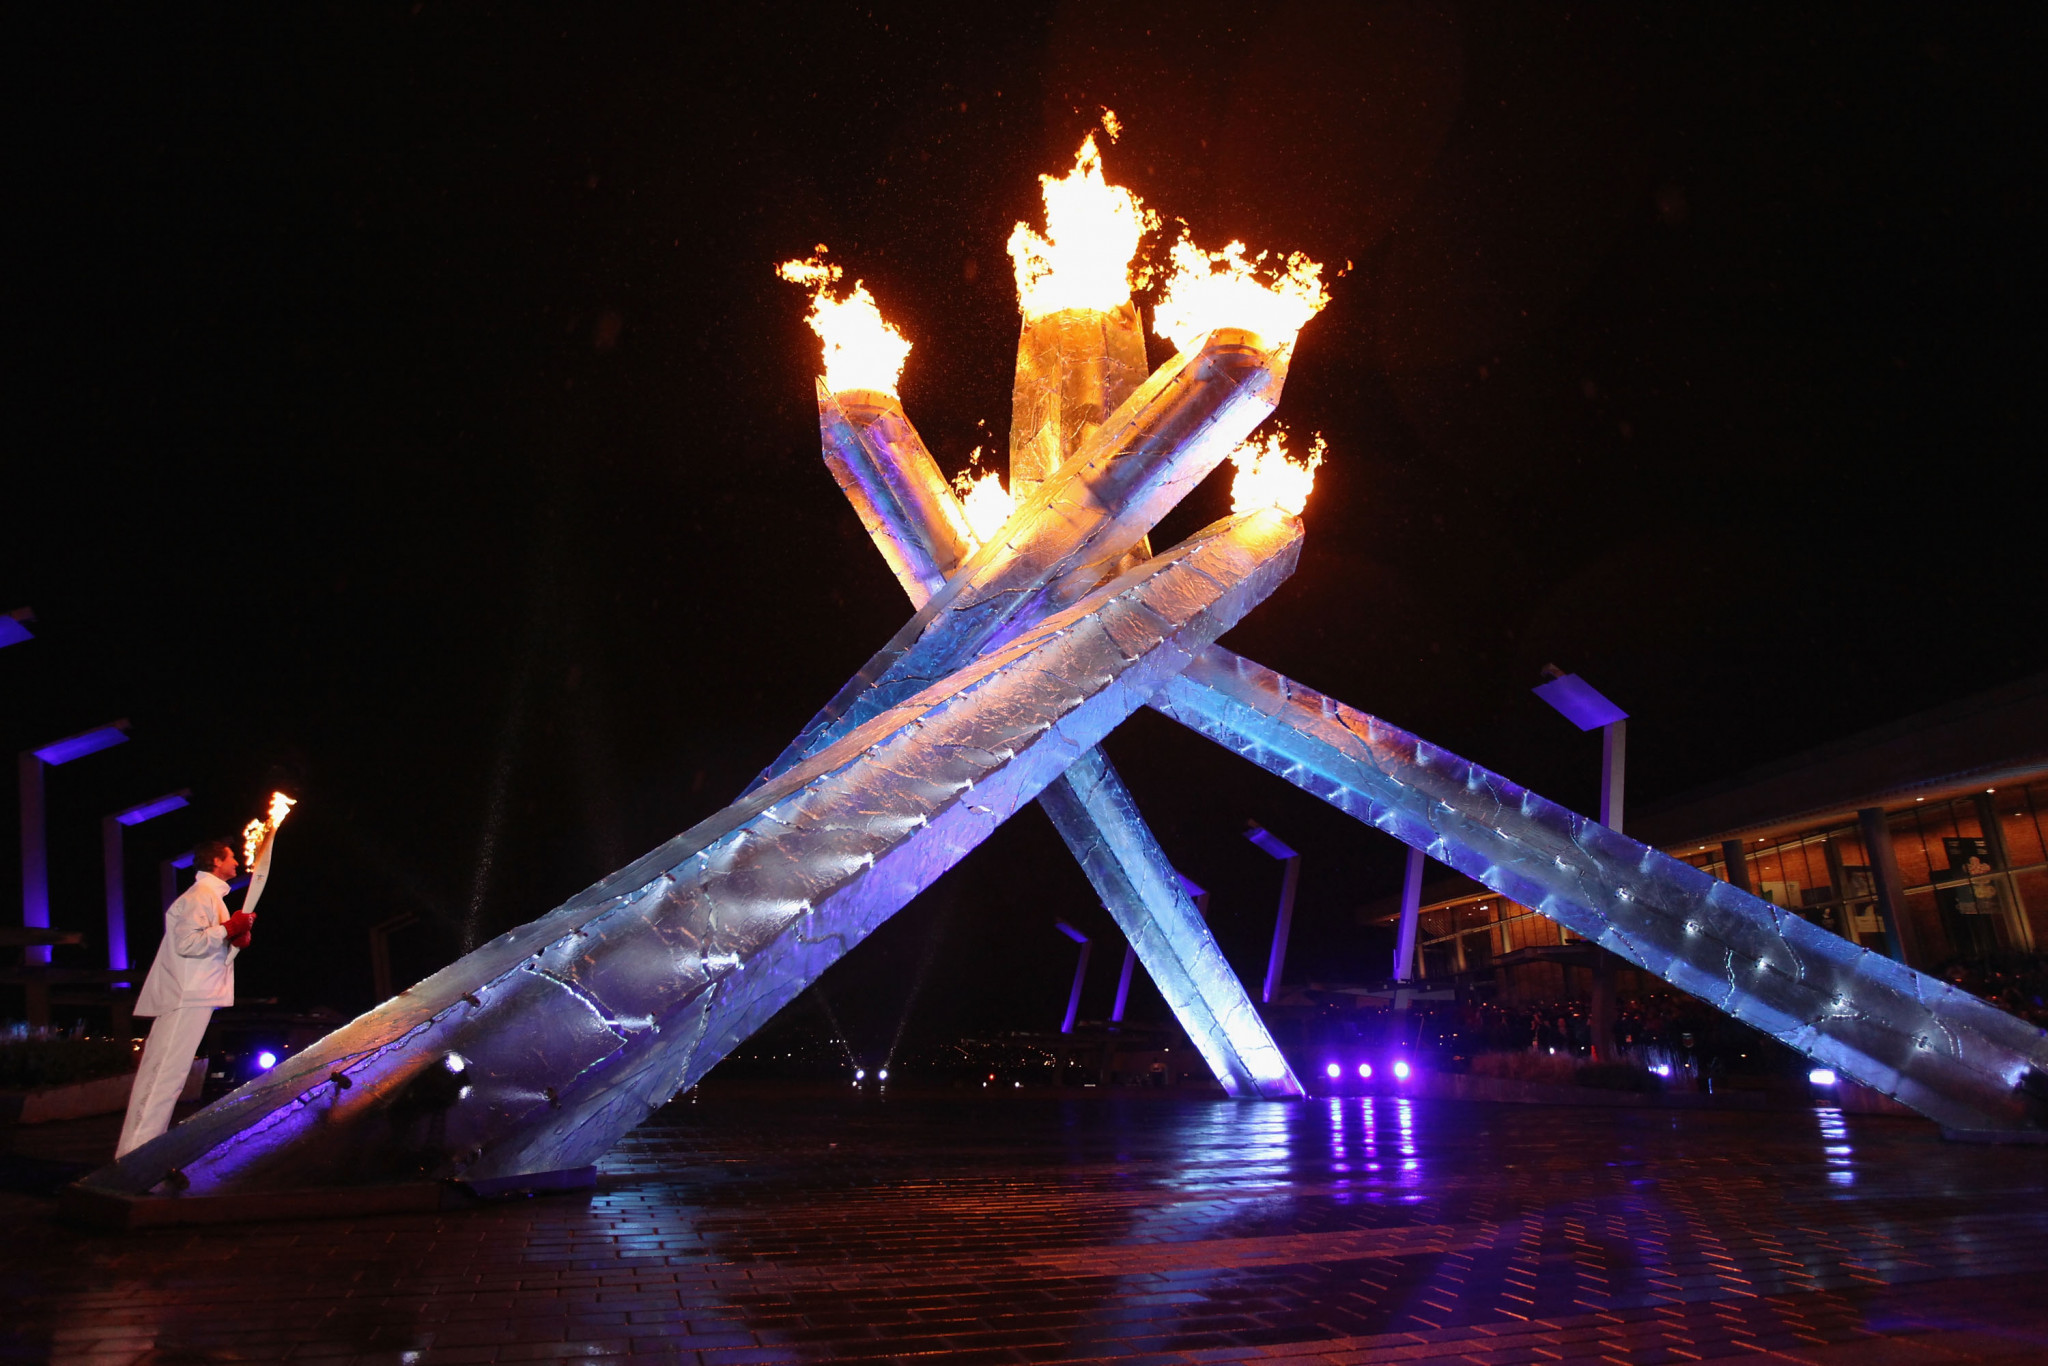 The 2010 Winter Olympic cauldron lit by legendary ice hockey star Wayne Gretzky has been vandalised ©Getty Images